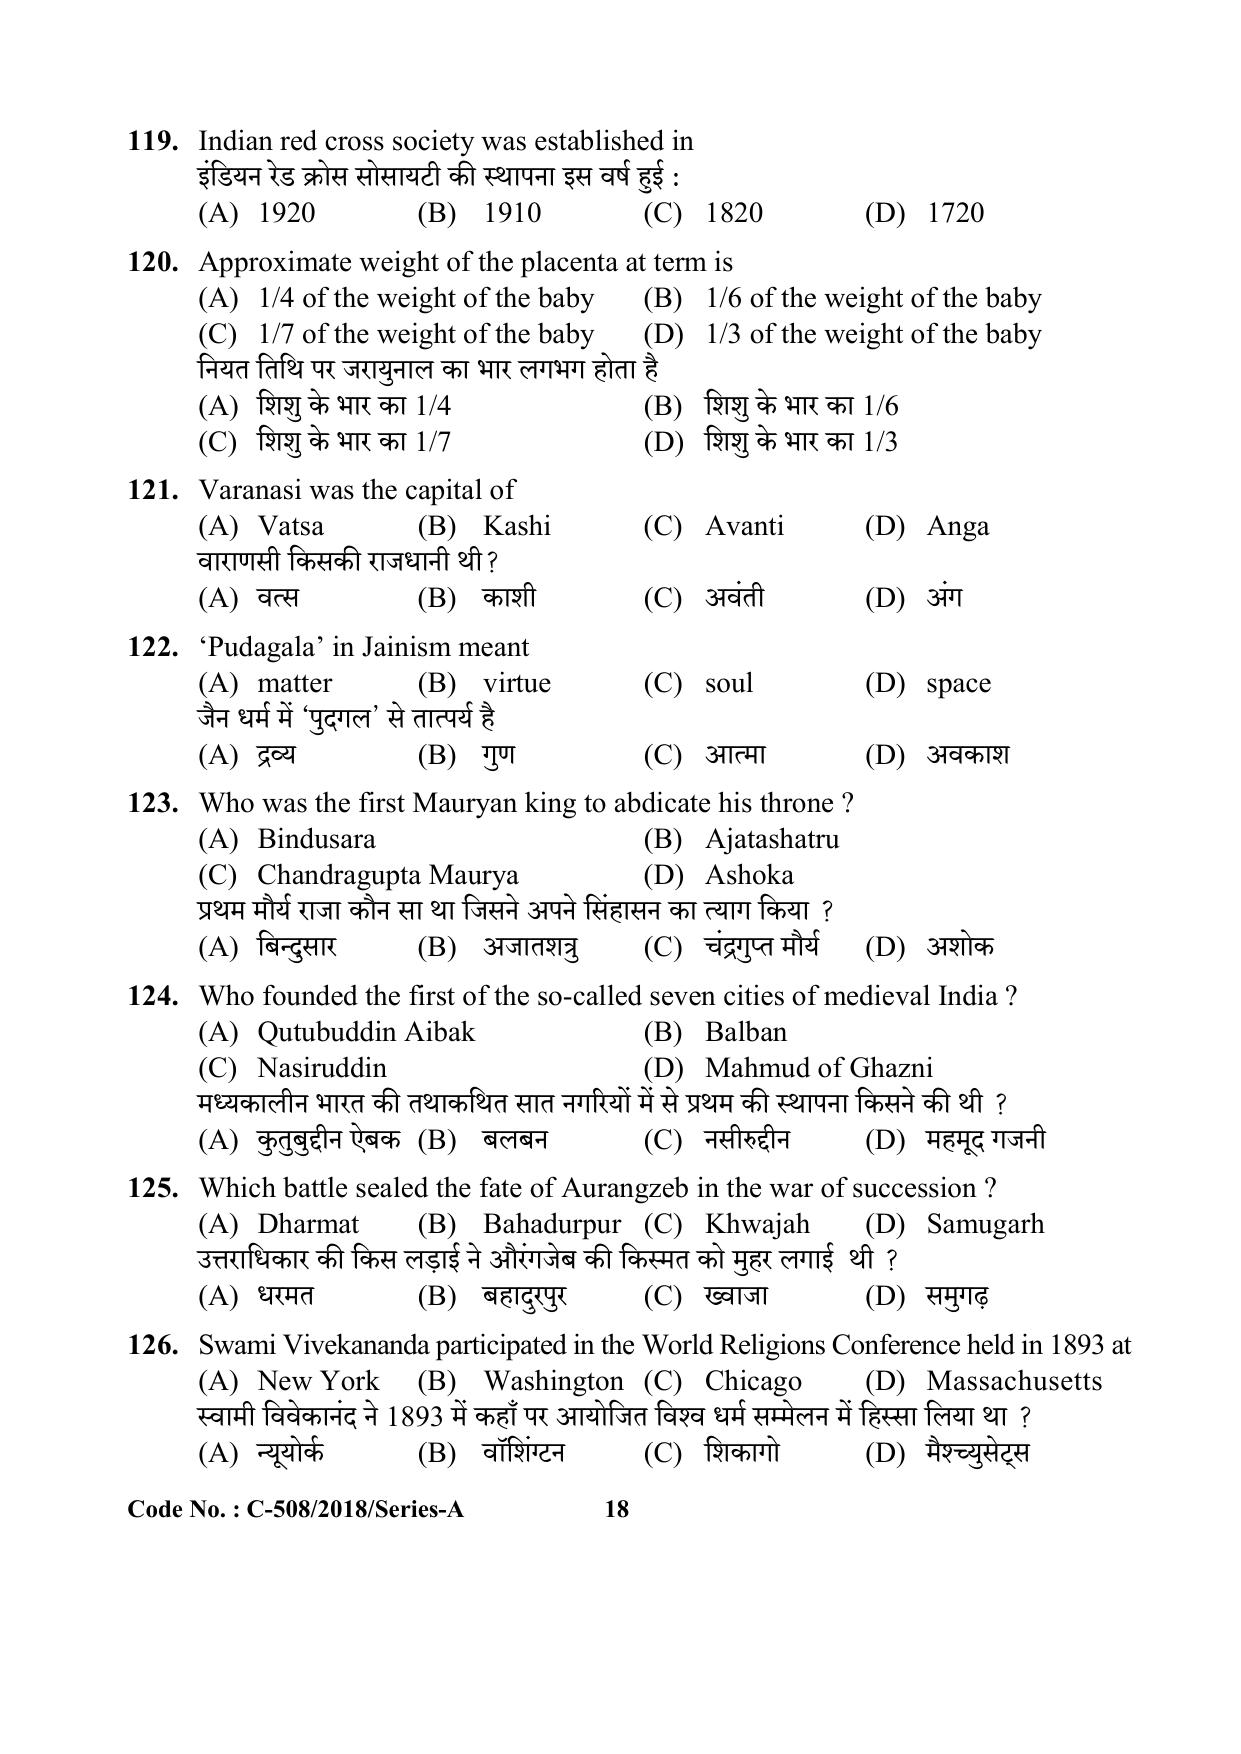 UP Health Worker Thematic Knowledge Previous Year Question Paper - Page 18